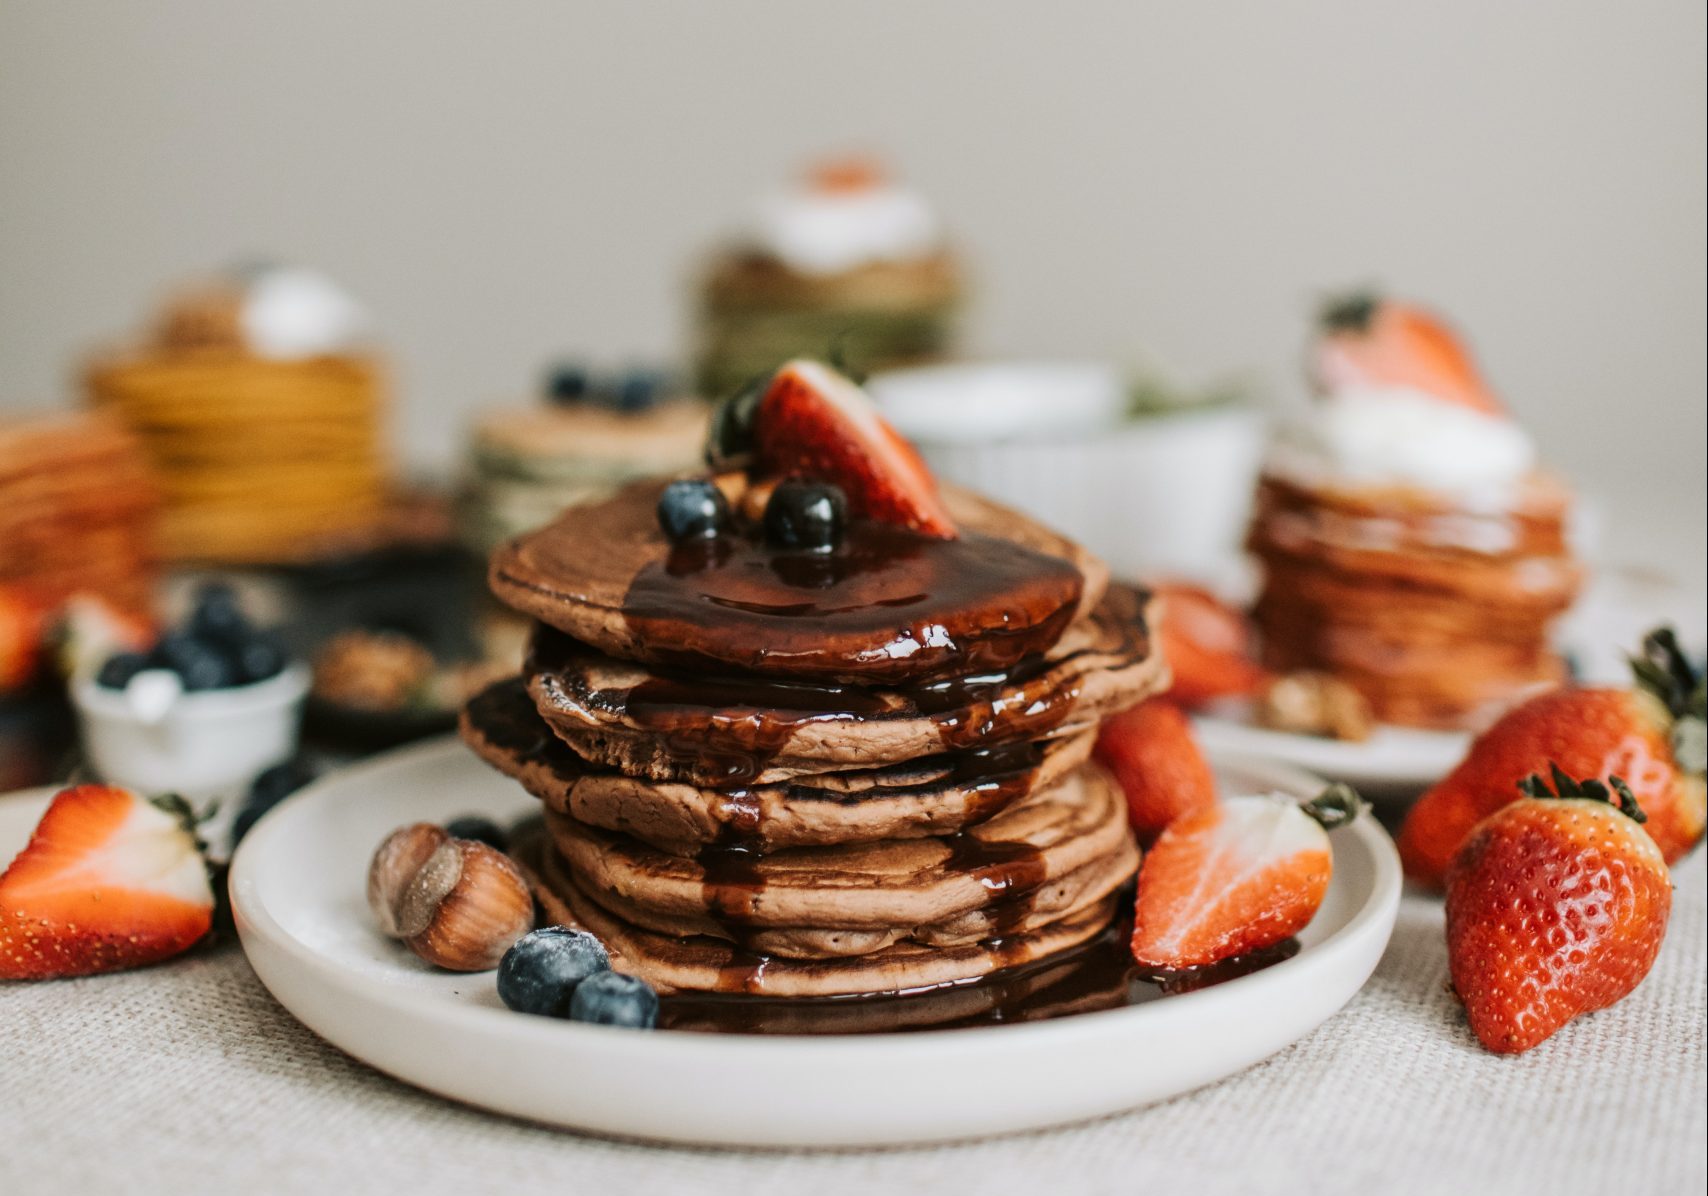 Stacks of pancakes served in several plates with brown sugar butter syrup, strawberries, blueberries and hazlenuts.